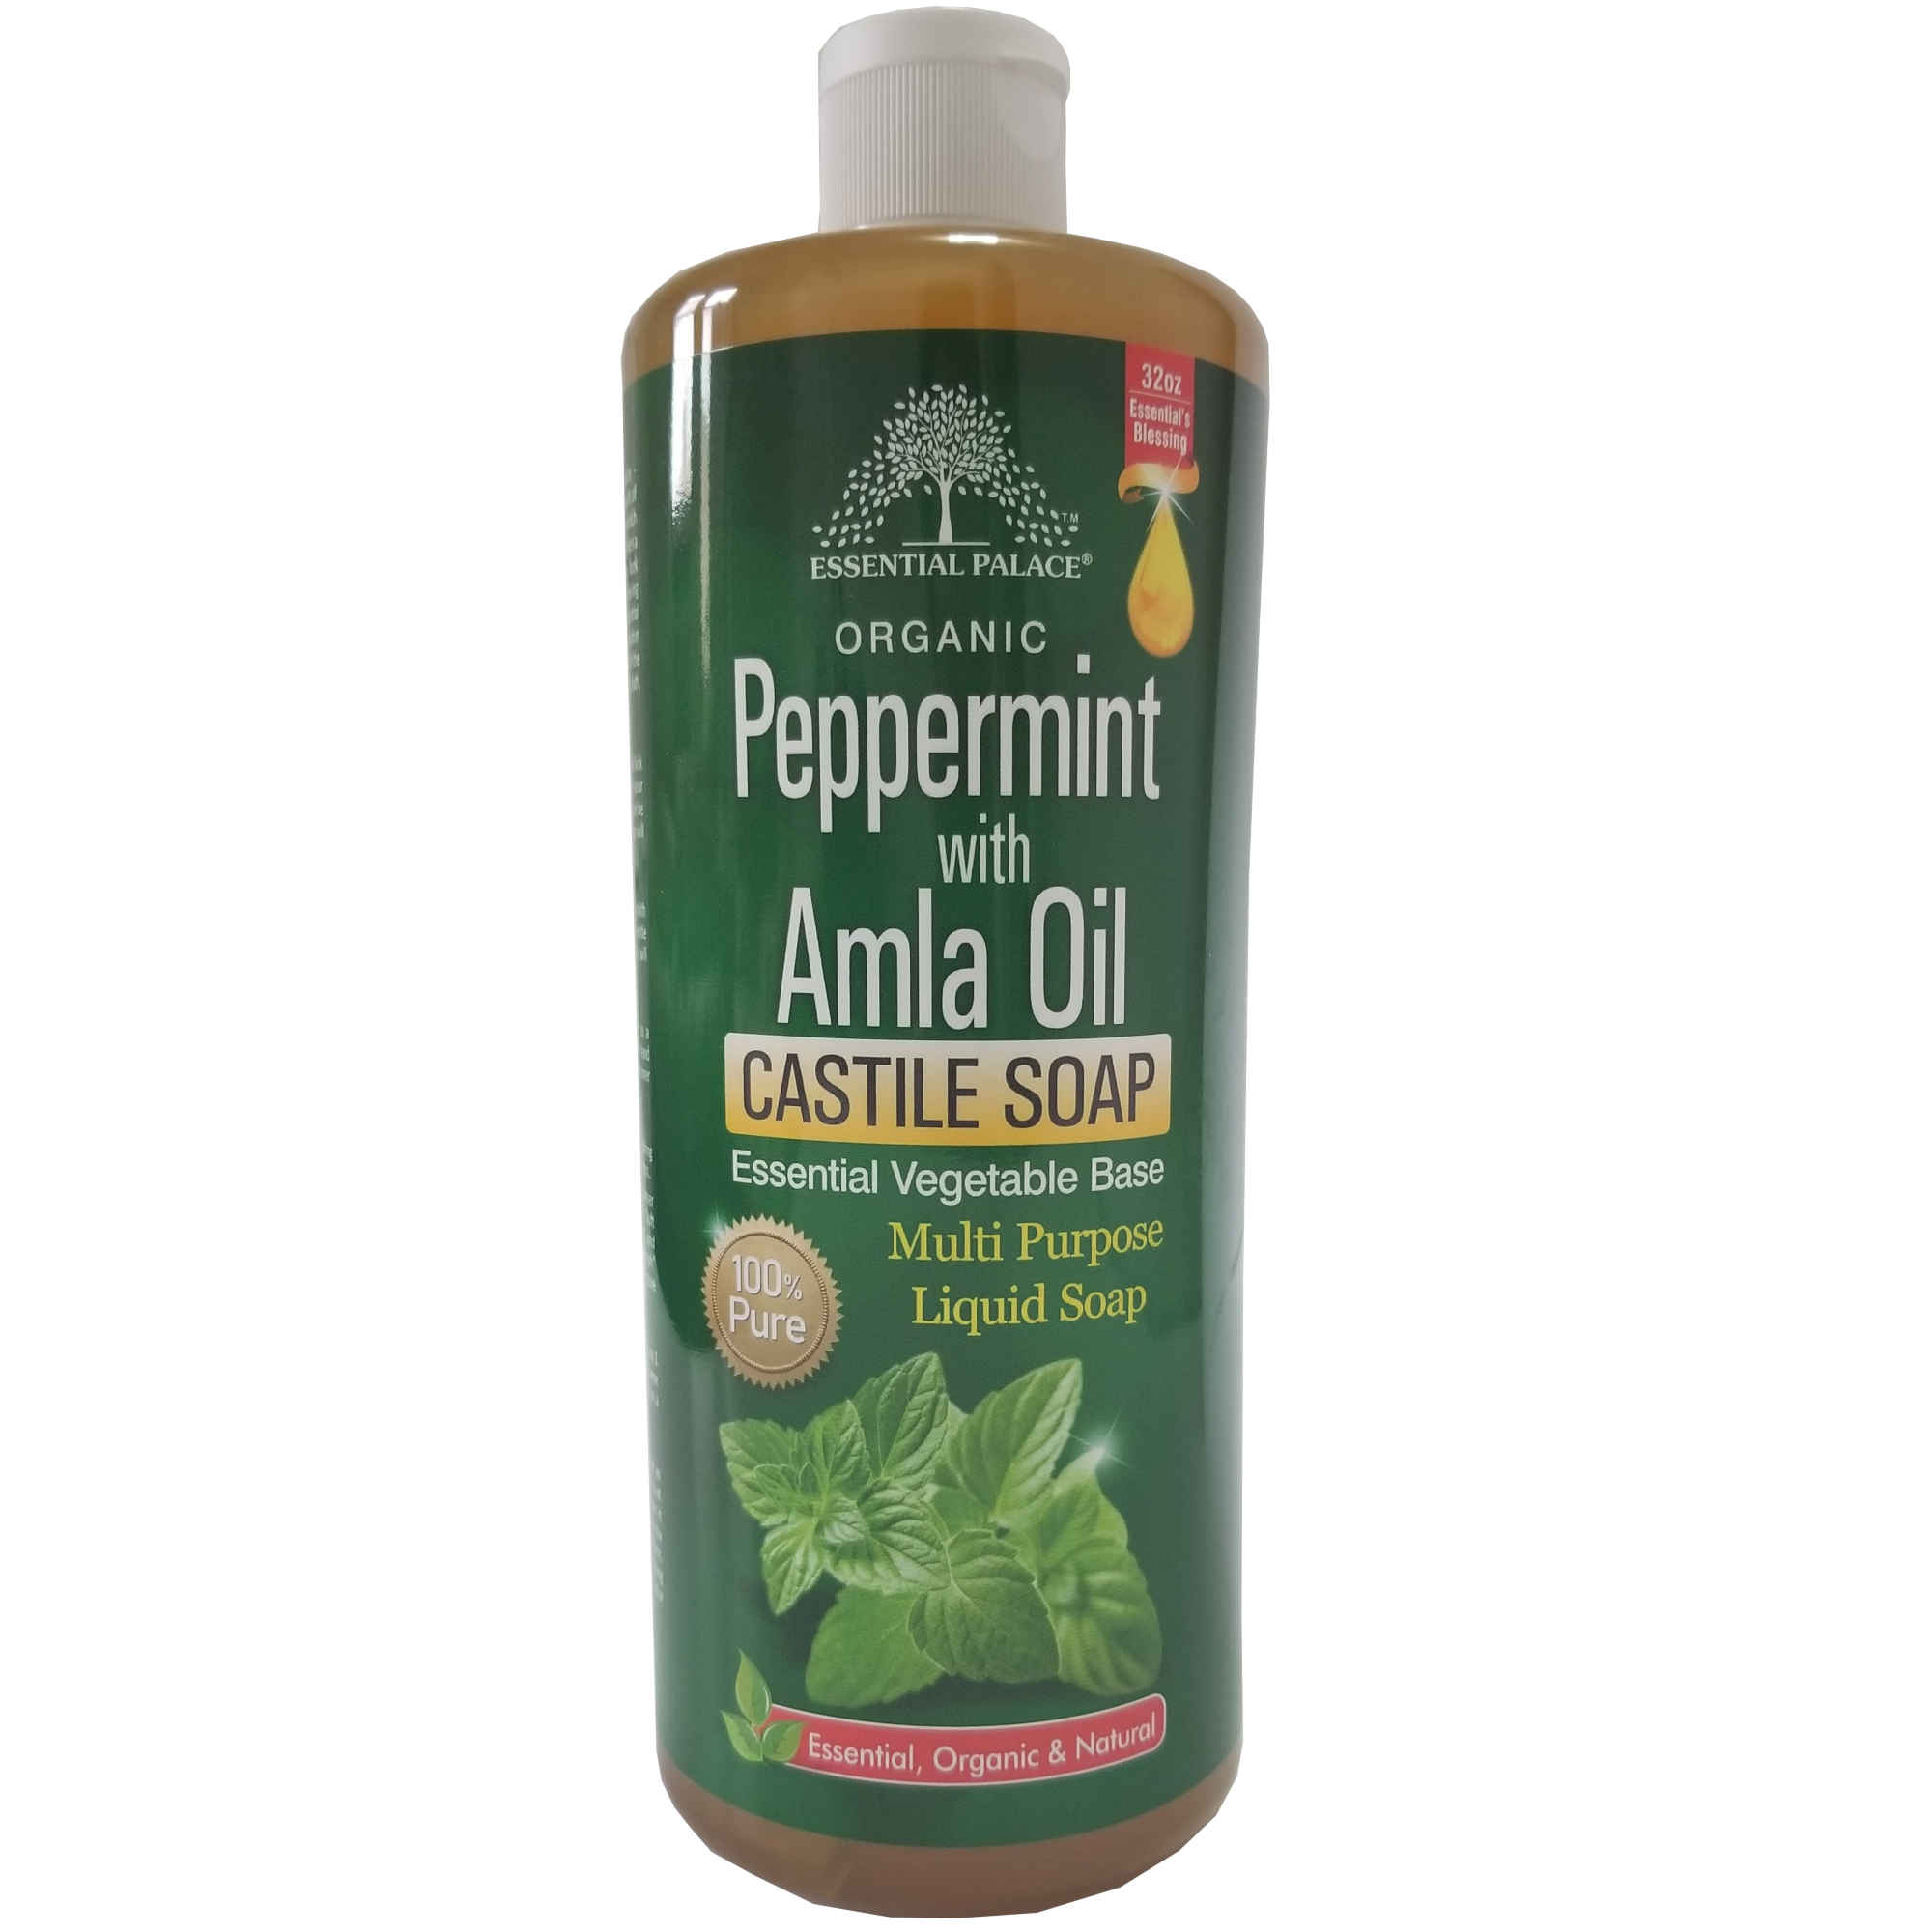 Essential Palace Peppermint with Amla Oil Castile Soap 32 OZ Front